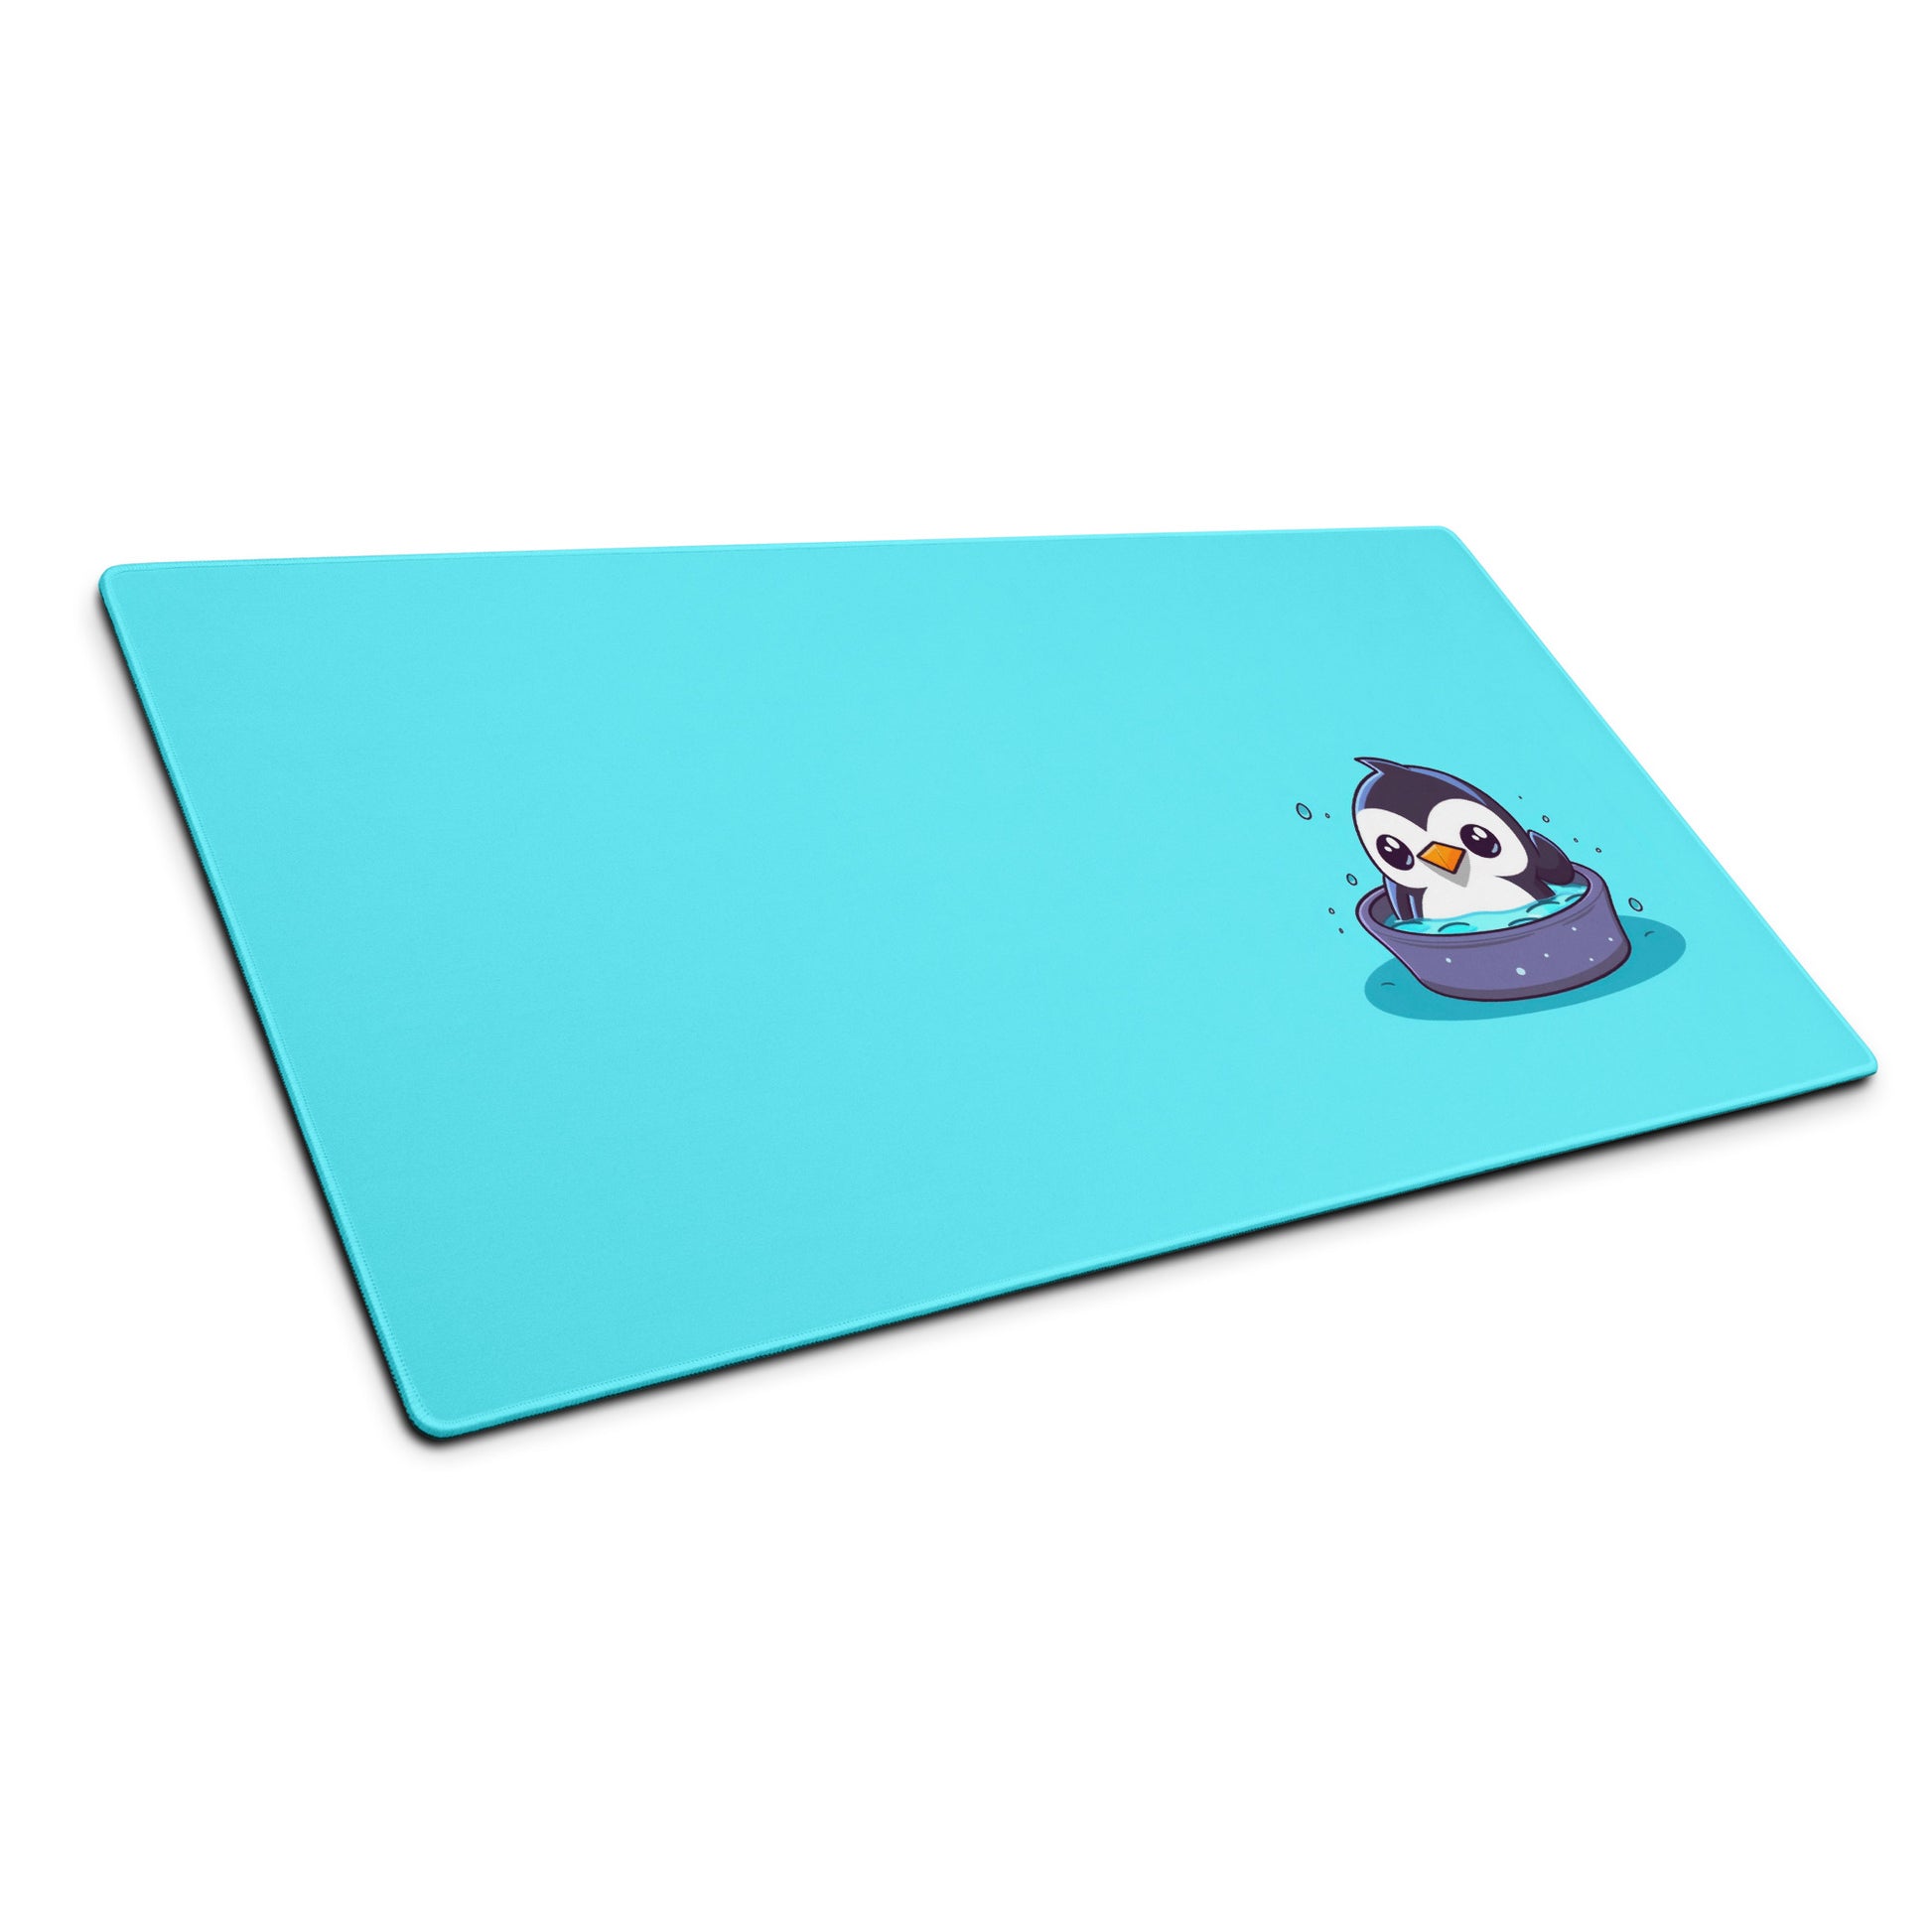 36" x 18" desk pad with a cute penguin sitting in an ice bath on it shown at an angle. Blue in color.